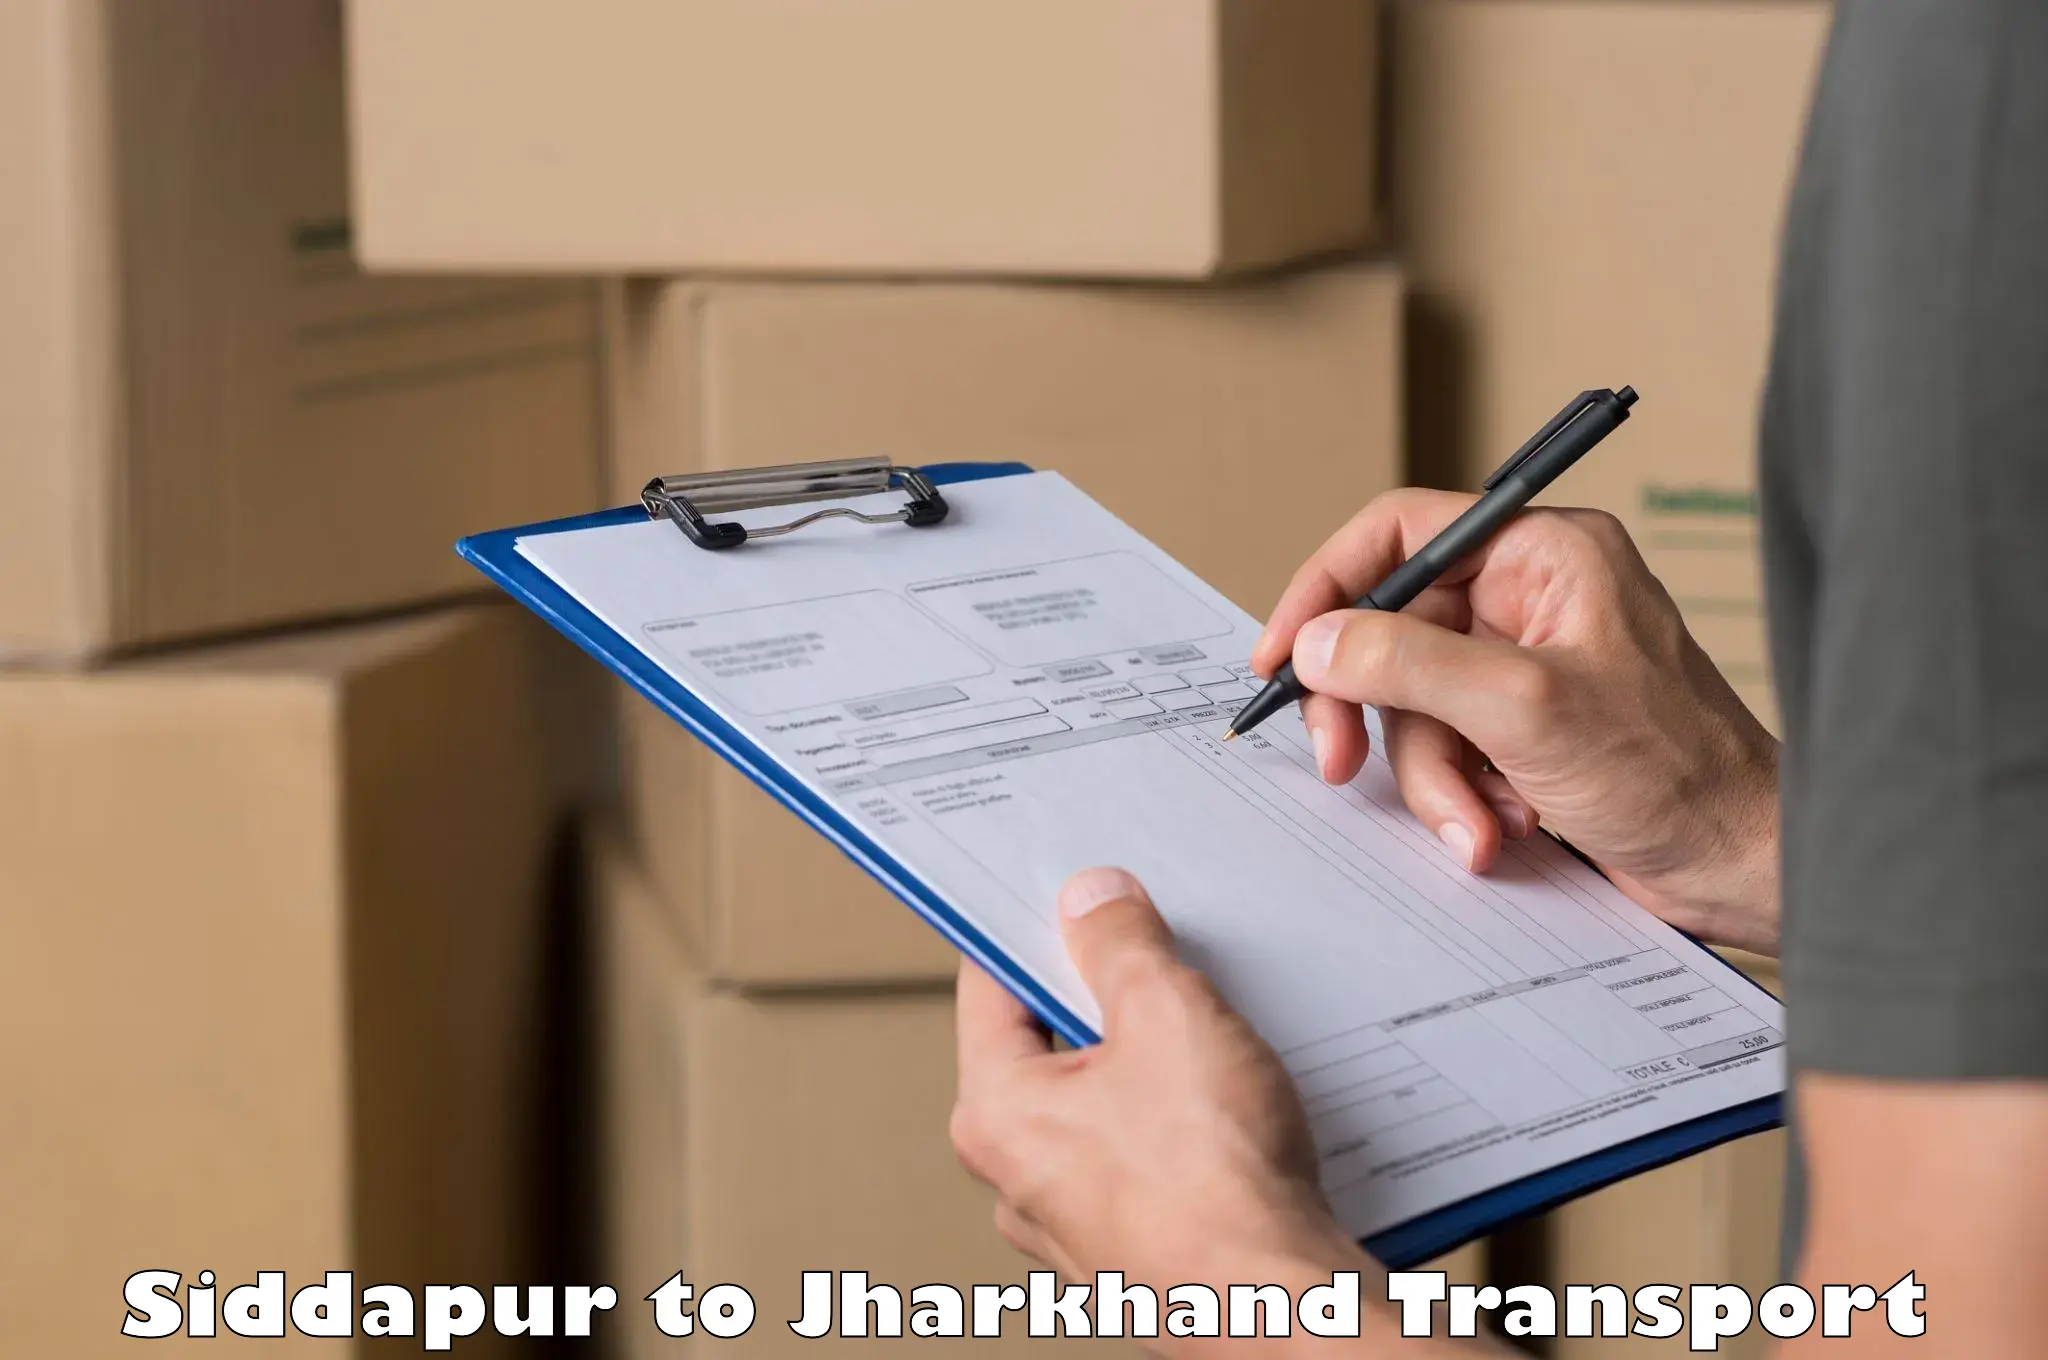 Cargo train transport services in Siddapur to Jharkhand